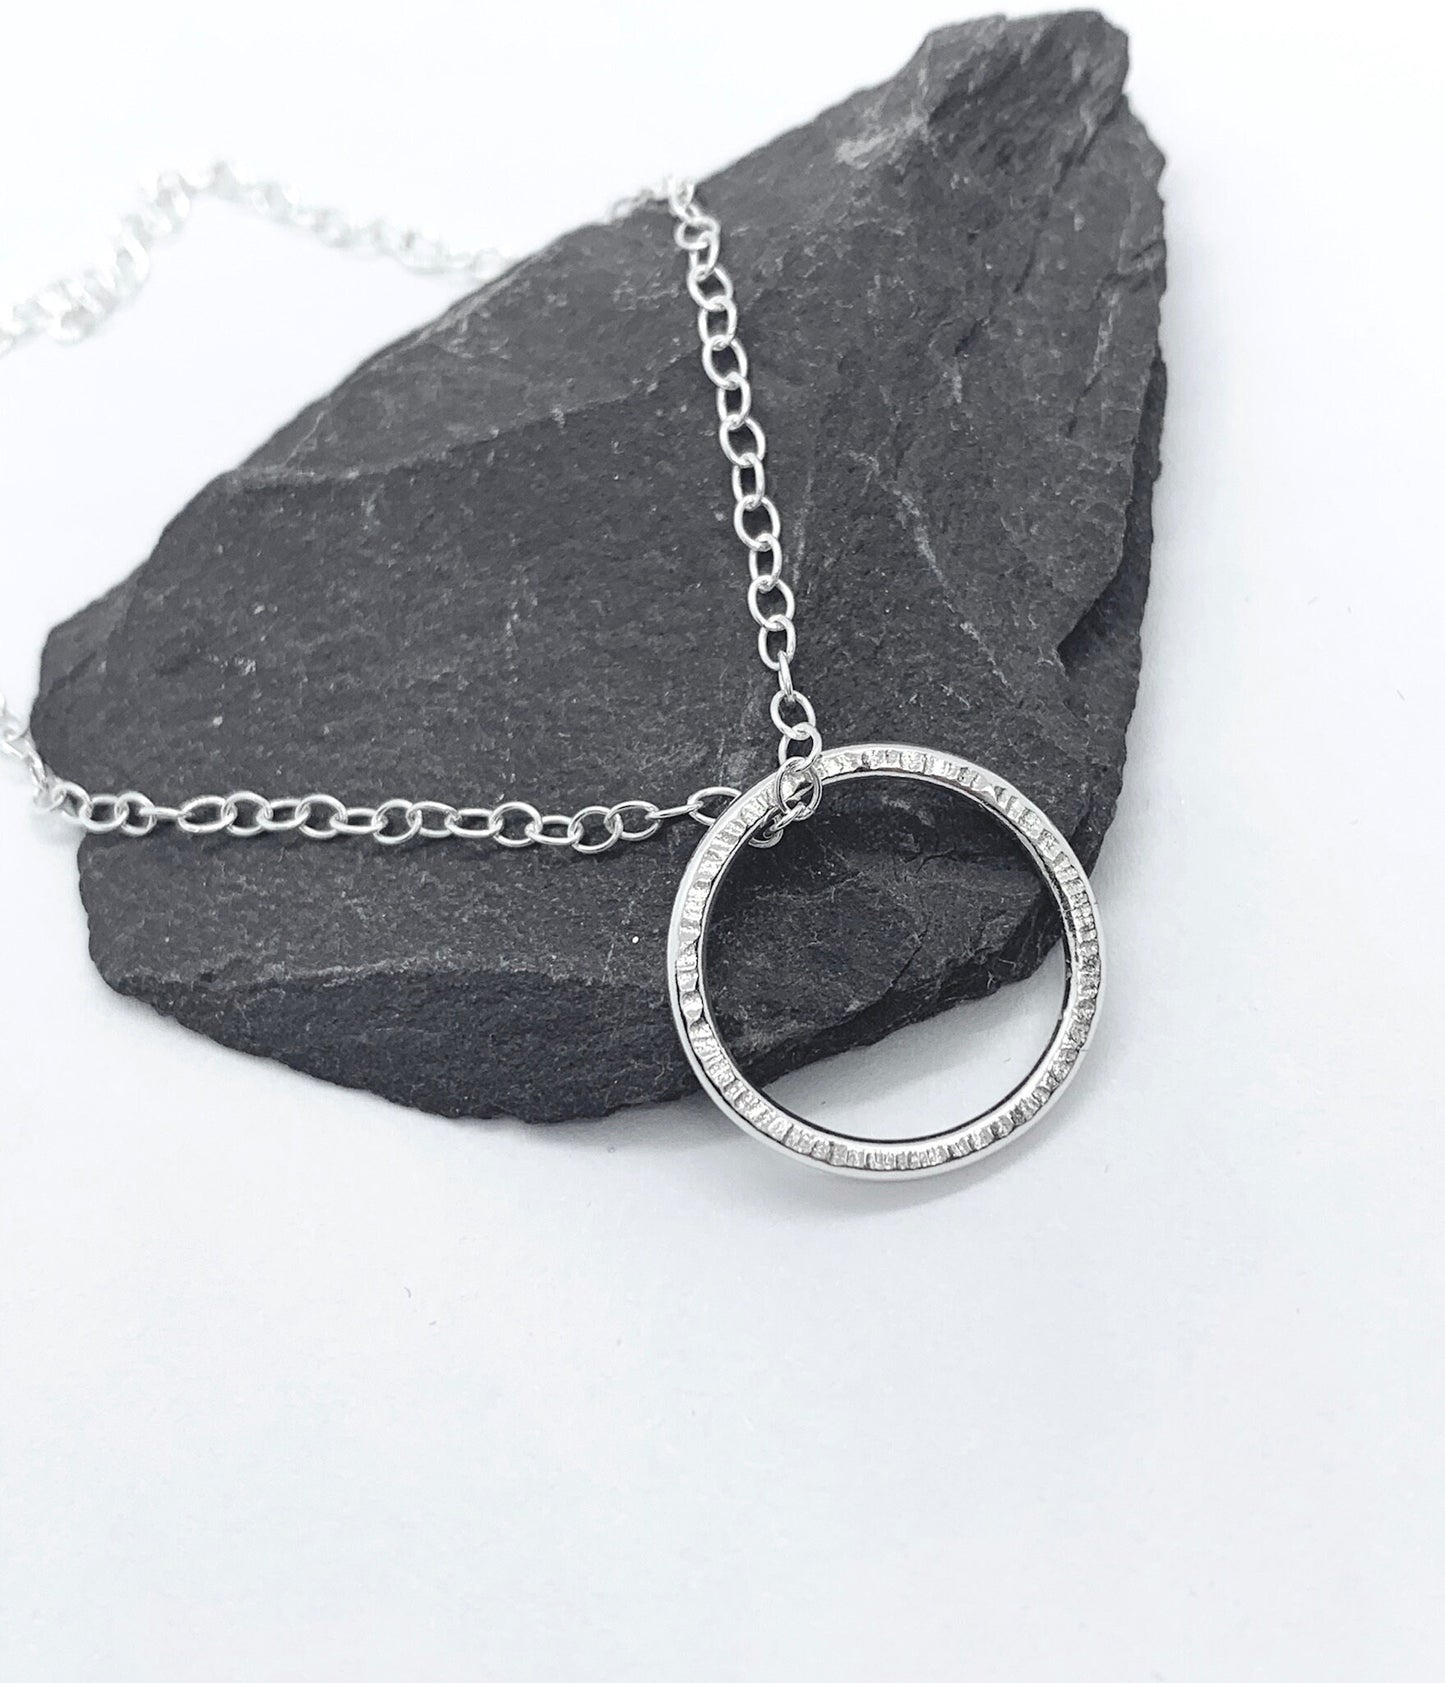 Sterling silver circle necklace